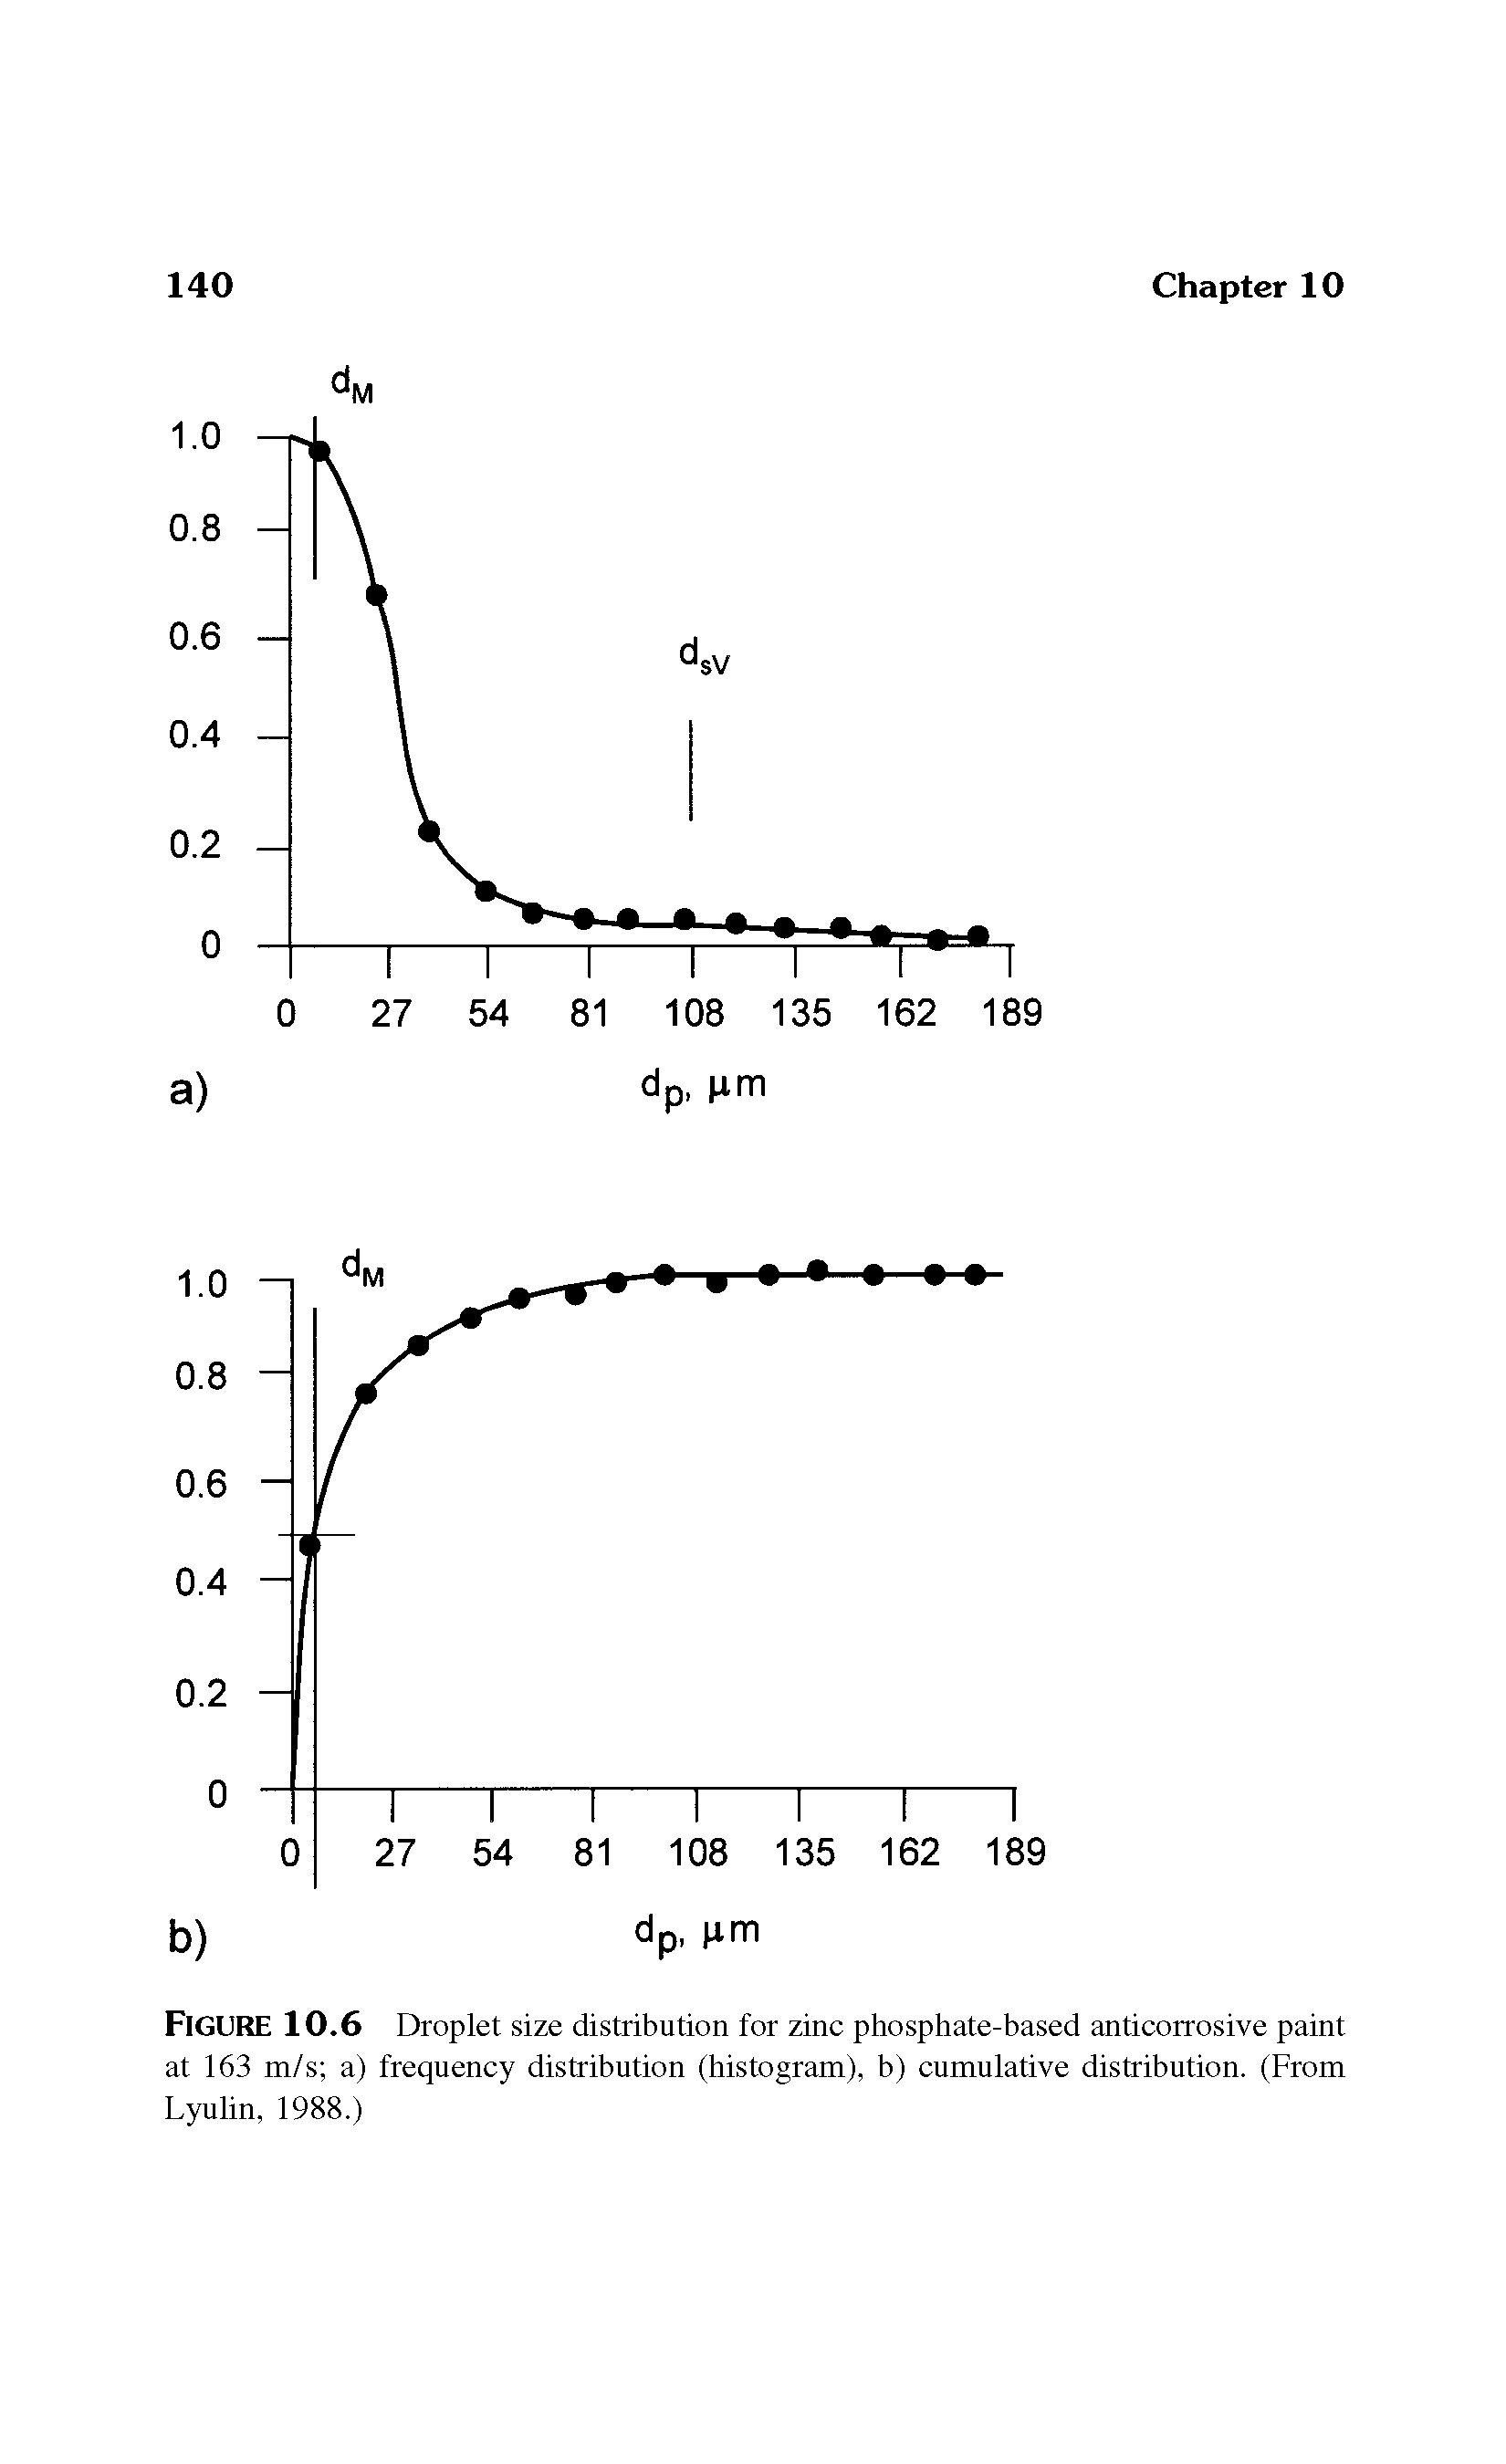 Figure 10.6 Droplet size distribution for zinc phosphate-based anticorrosive paint at 163 m/s a) frequency distribution (histogram), b) cumulative distribution. (From Lyulin, 1988.)...